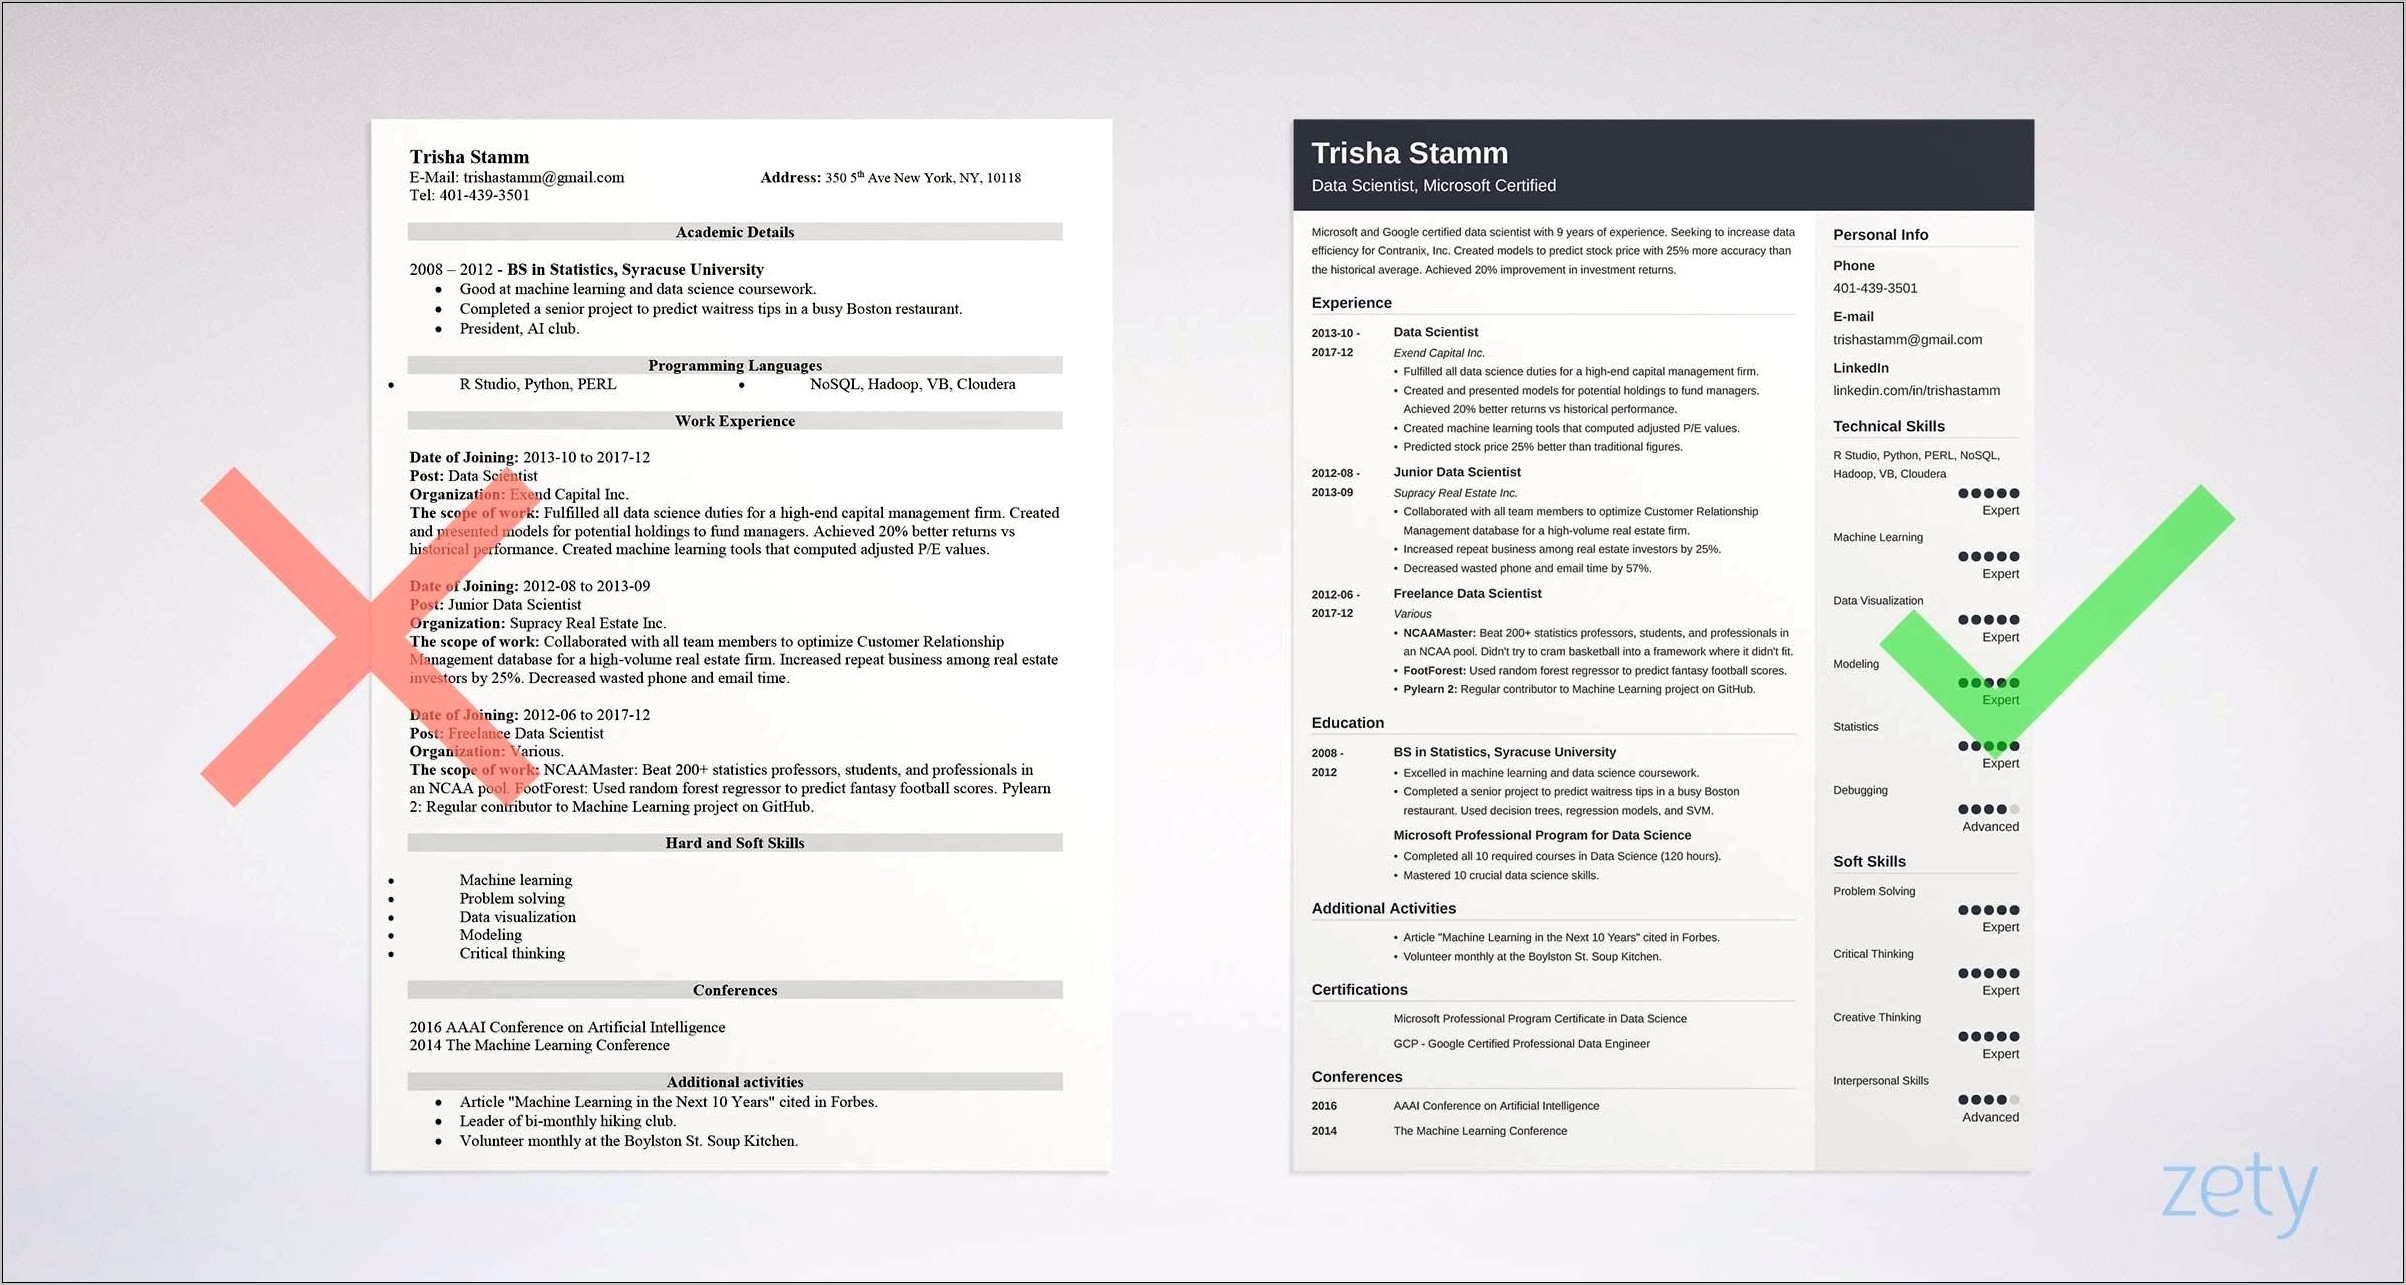 Resume Objective Examples For Entry Level Data Scientist